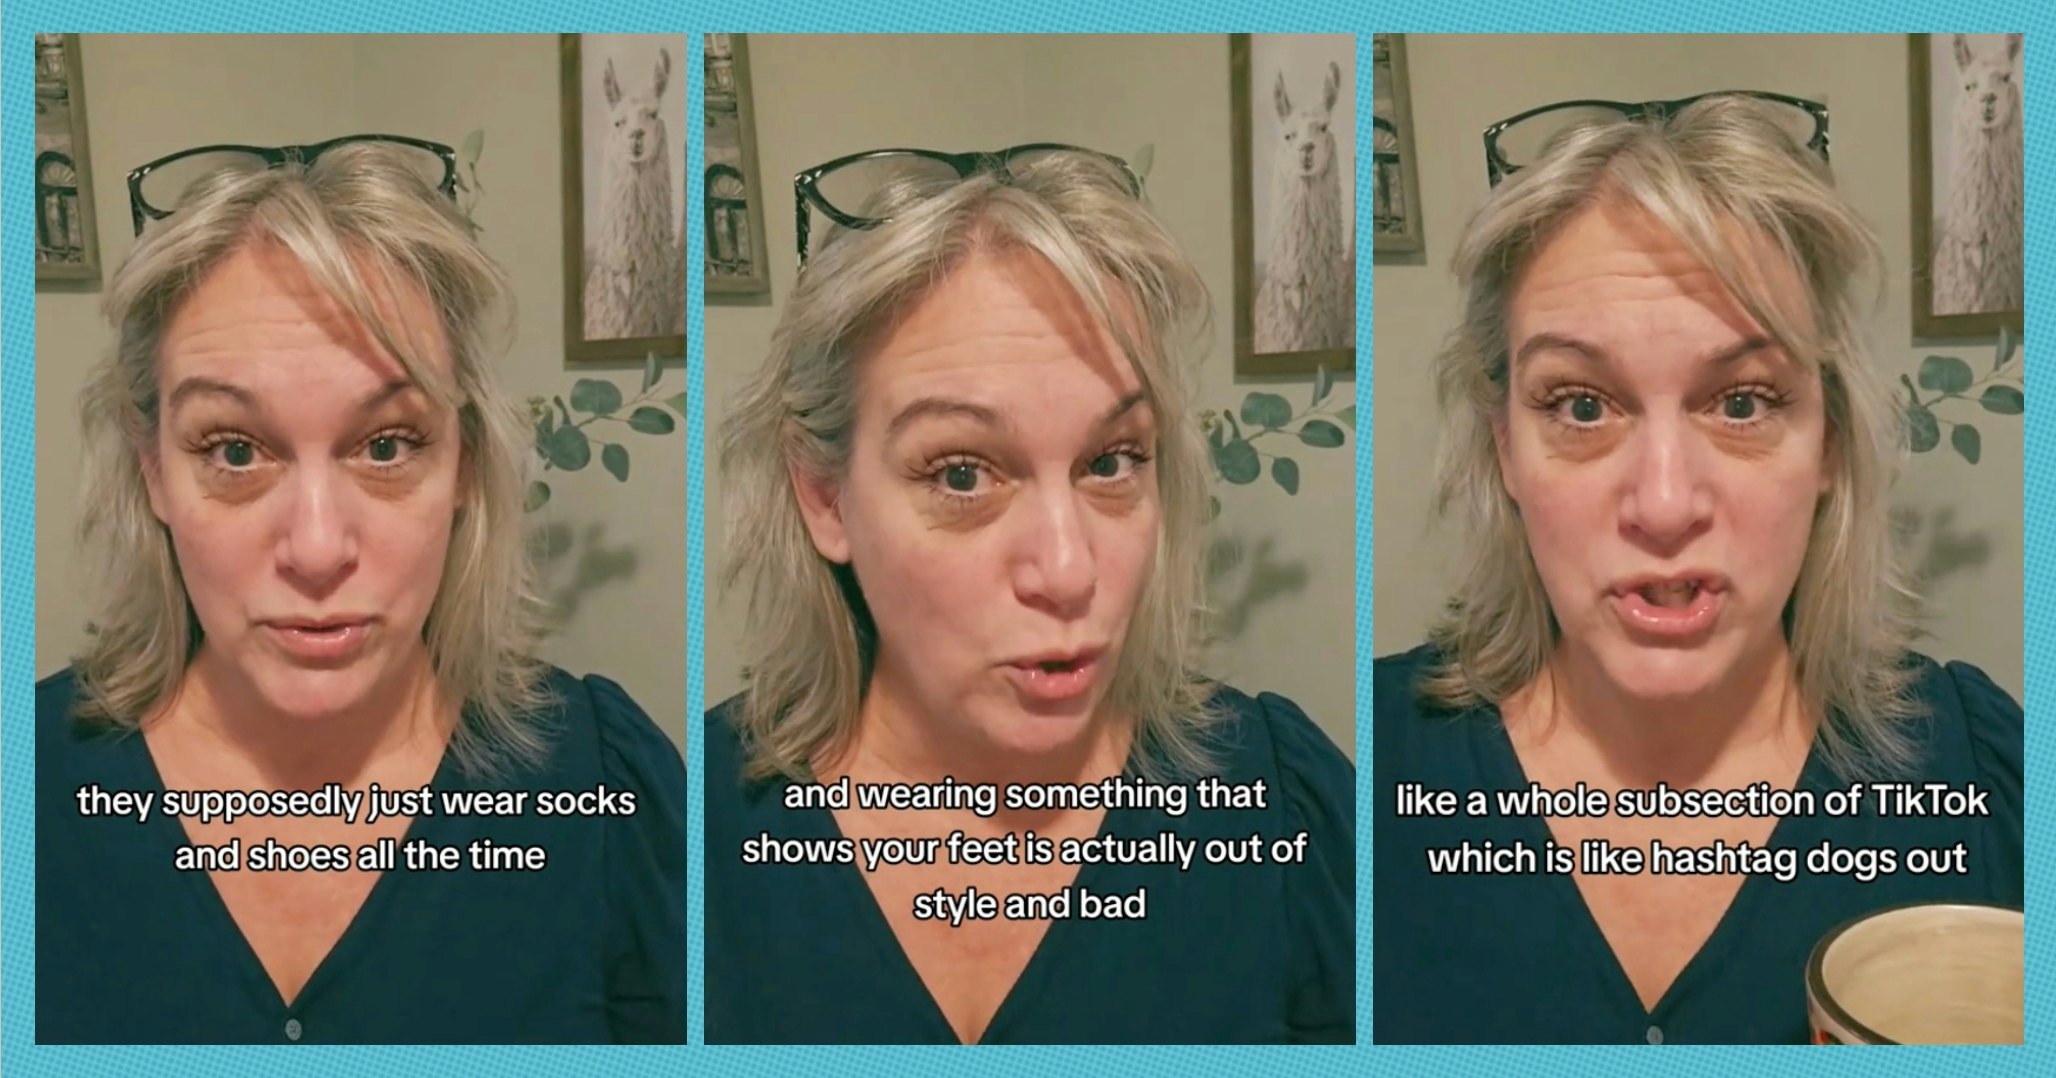 Your socks expose whether you are a Millennial or Gen Z